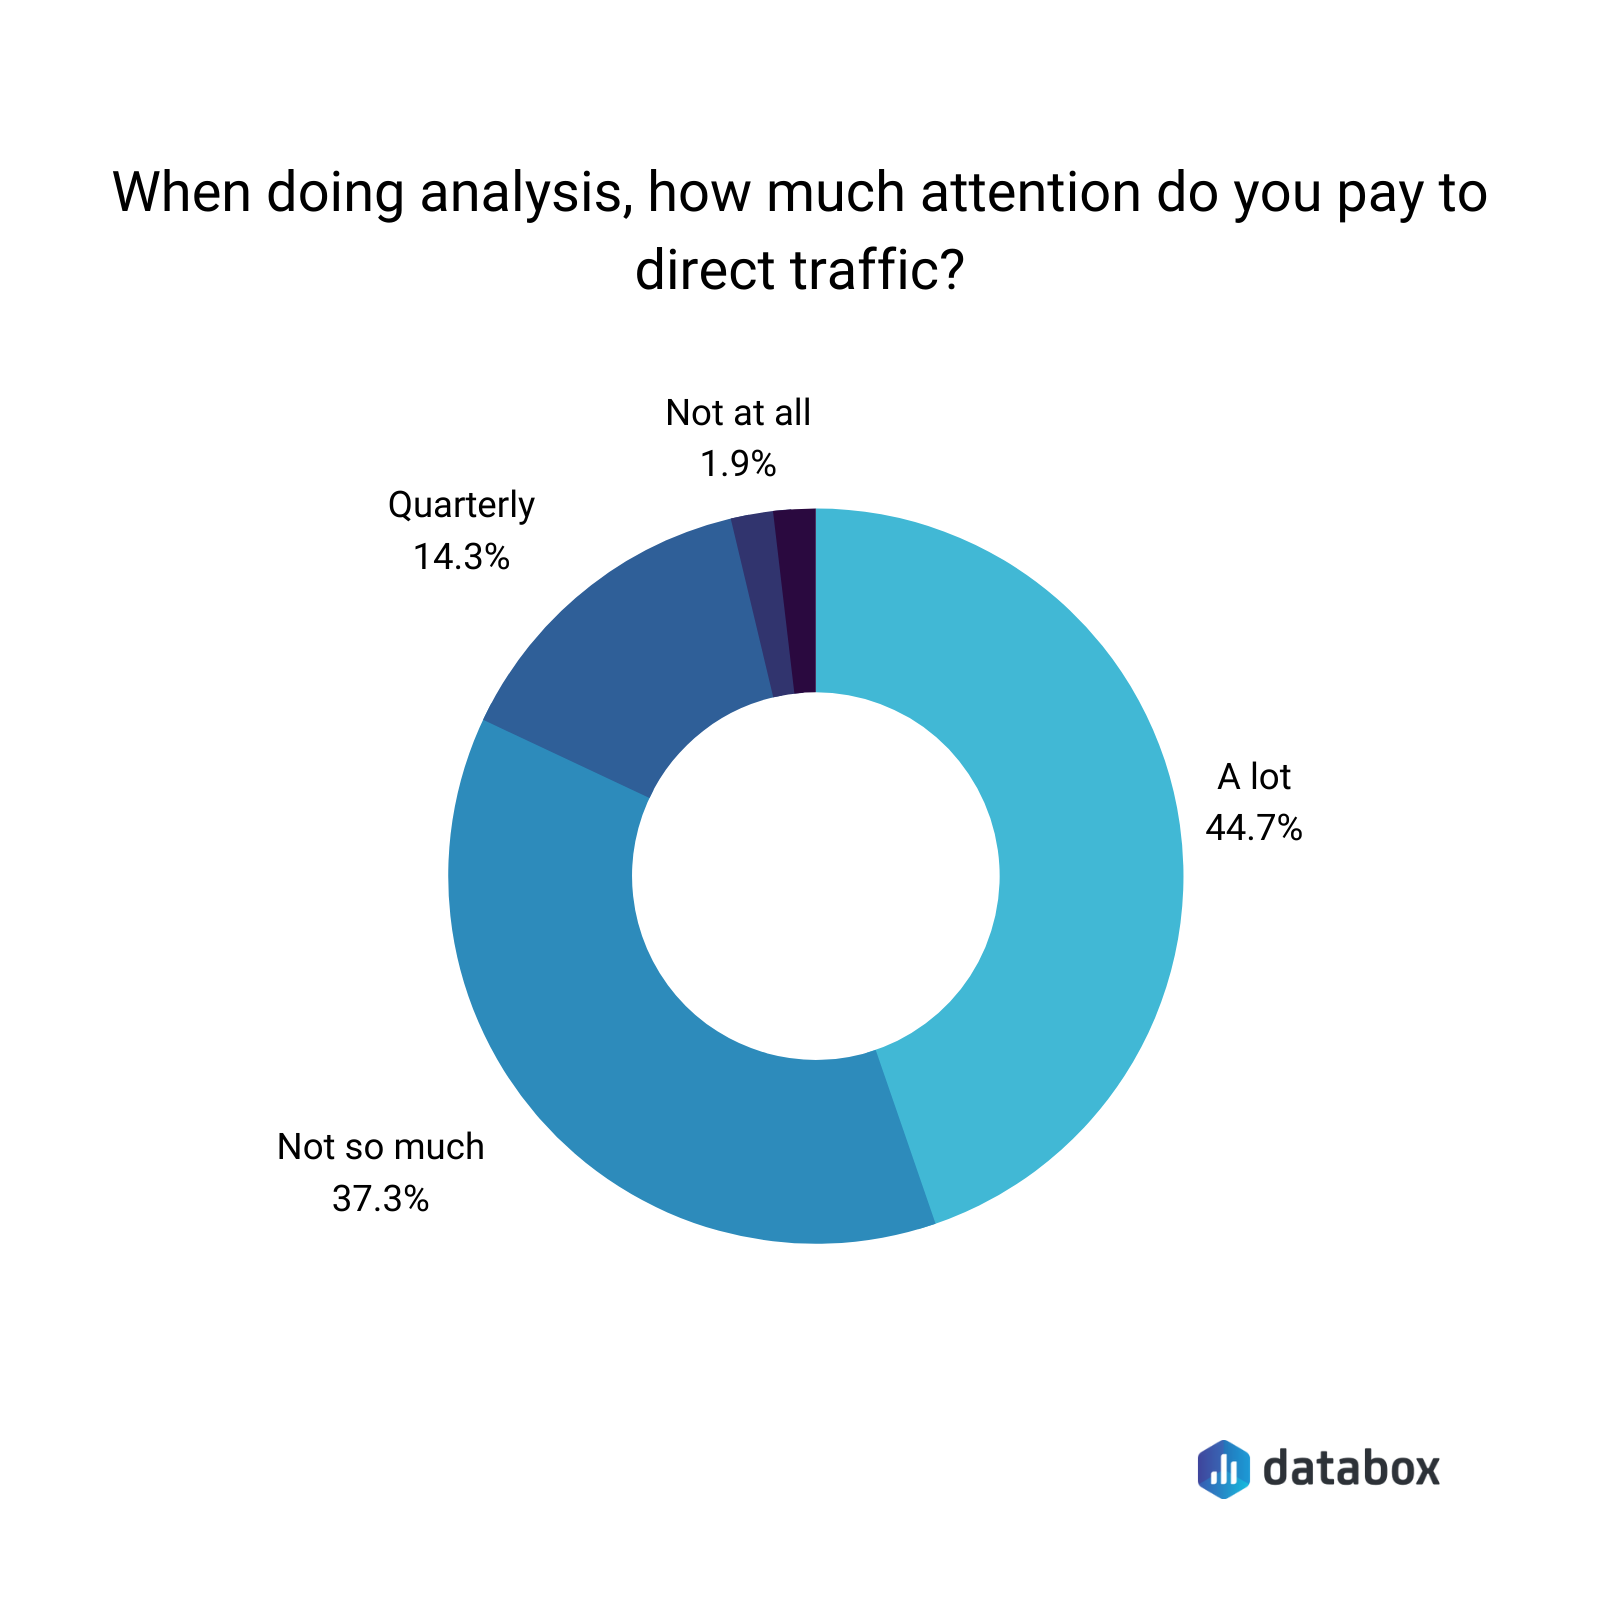 when doing analysis, how much attention do you pay to direct traffic